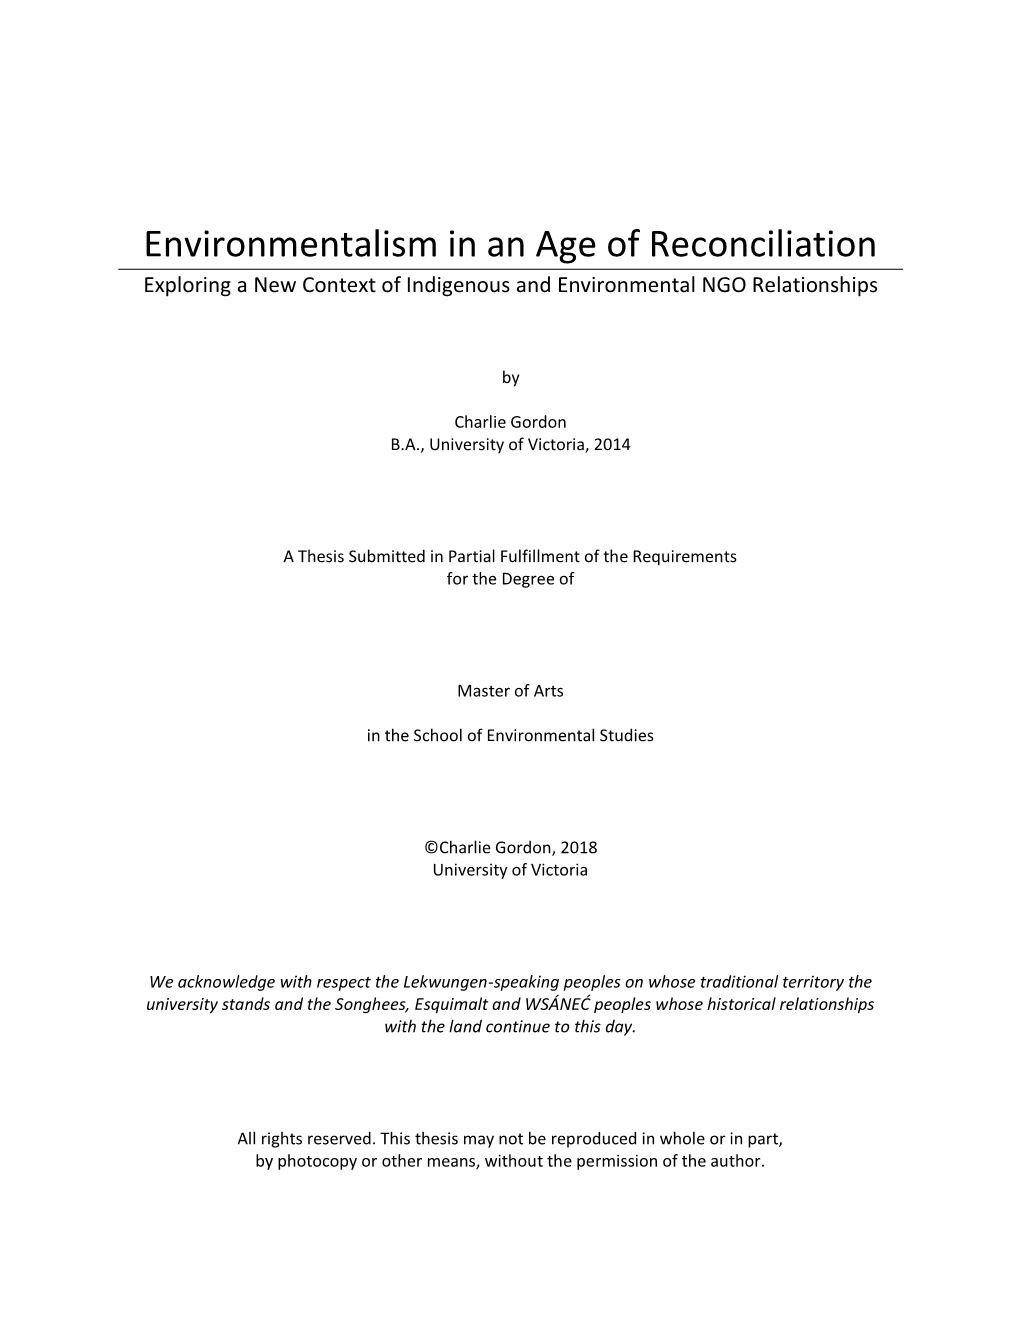 Environmentalism in an Age of Reconciliation Exploring a New Context of Indigenous and Environmental NGO Relationships